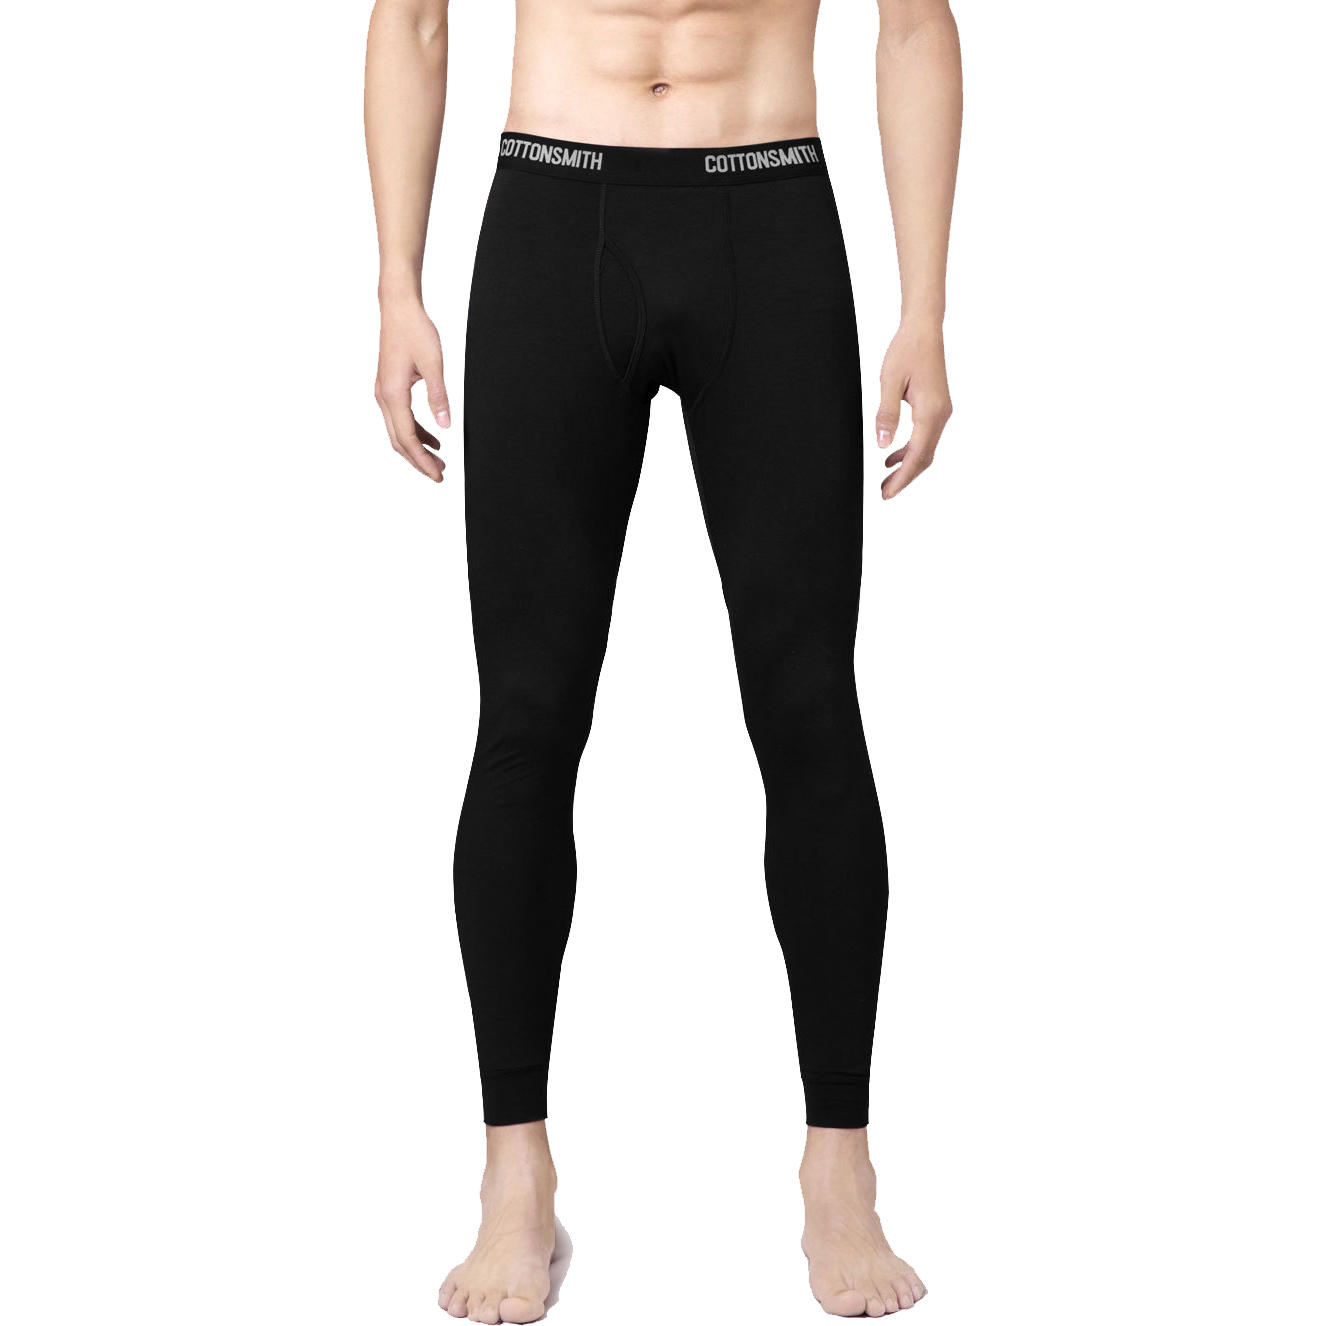 Xiaomi Mihome Mens Far Infrared Insulated Long Johns Underwear Cold Winter Pants